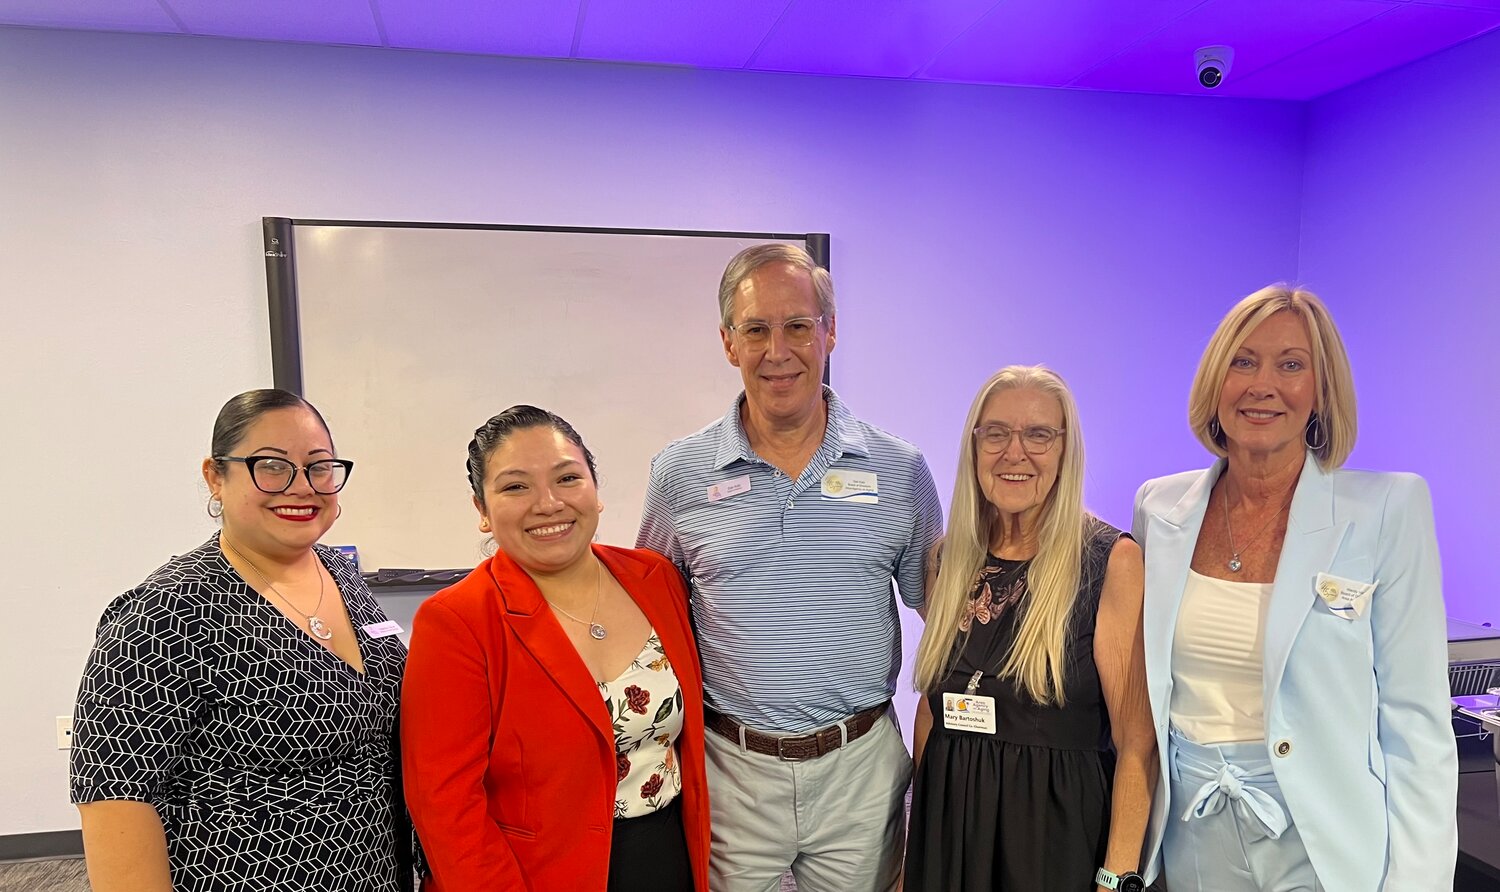 From left to right are Valerine Oliver, director of Client Services, AAASWFL; Maricela Morado, president and CEO, AAASWFL; Dan Katz, board member, AAASWFL; Wendy Boaz-Hayes, board chair, AAASWFL